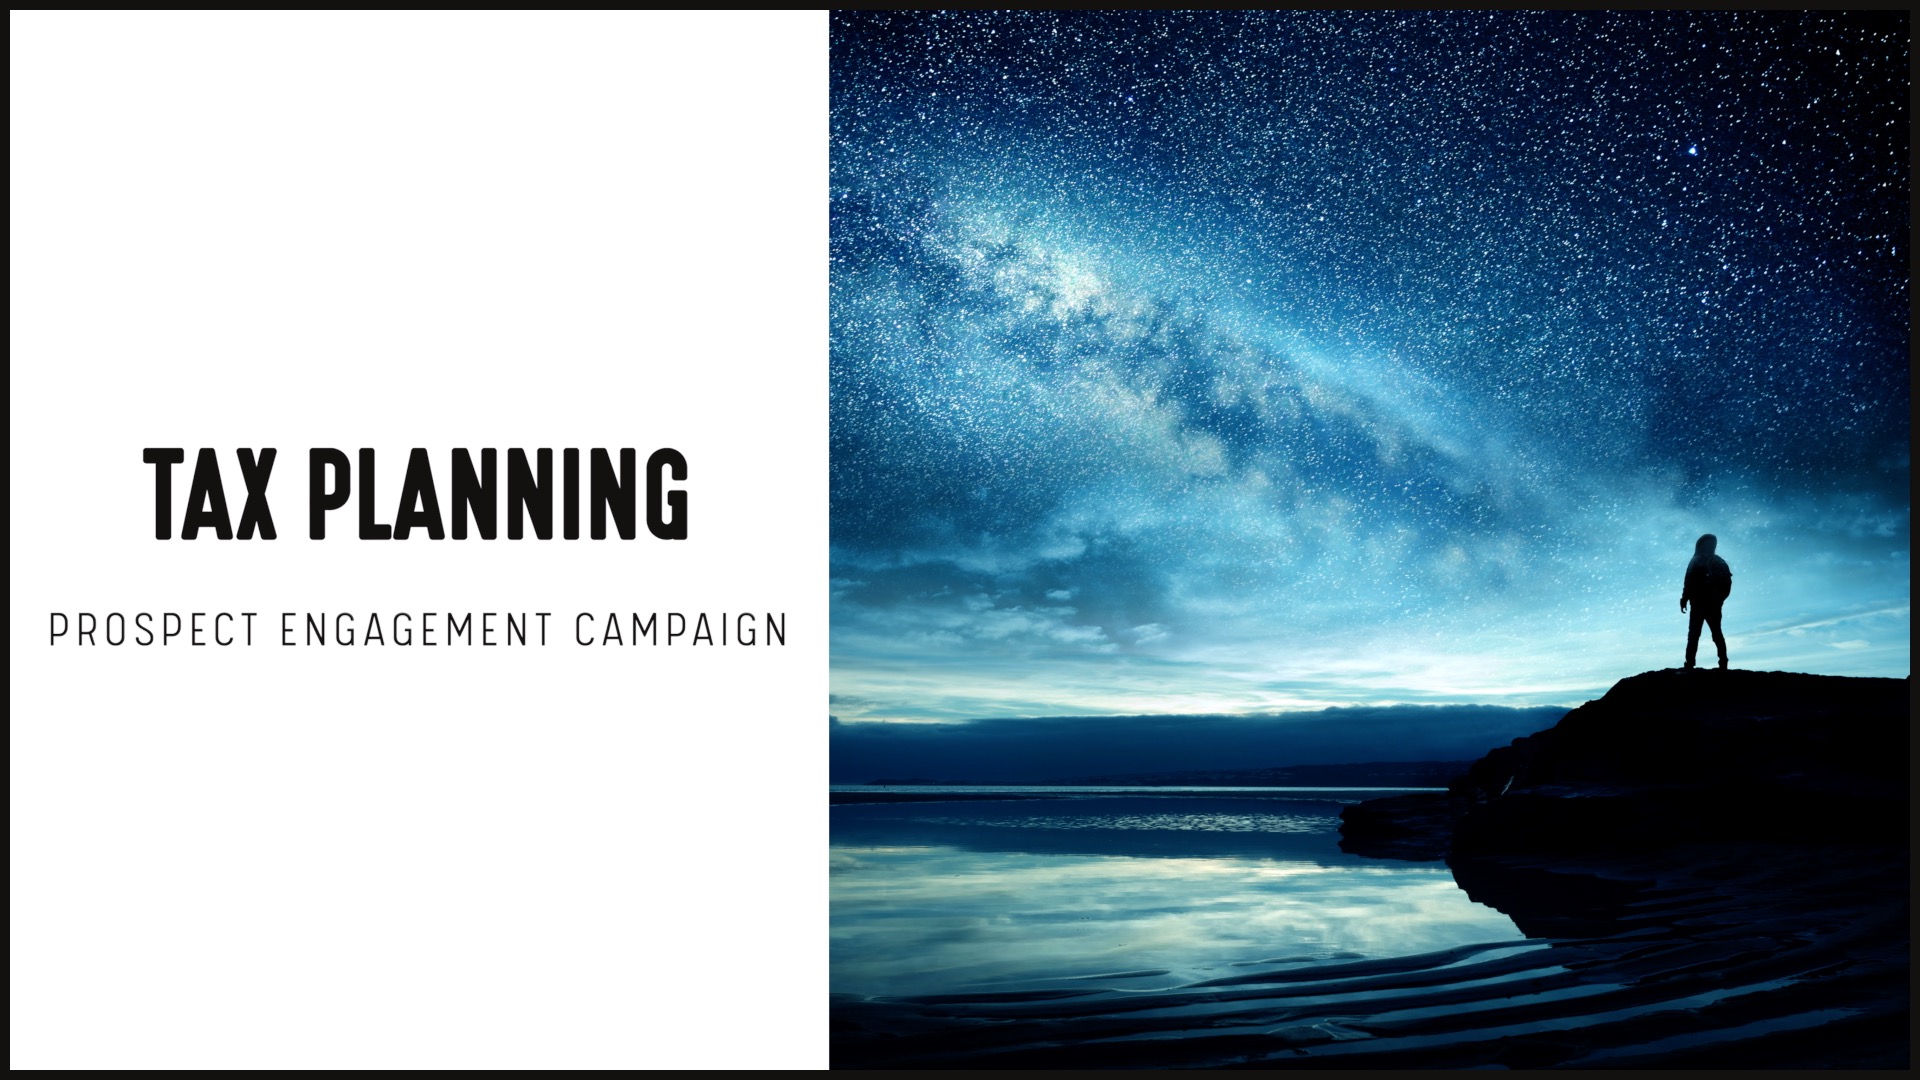 [NEW] Prospect Engagement Campaign | Tax Planning